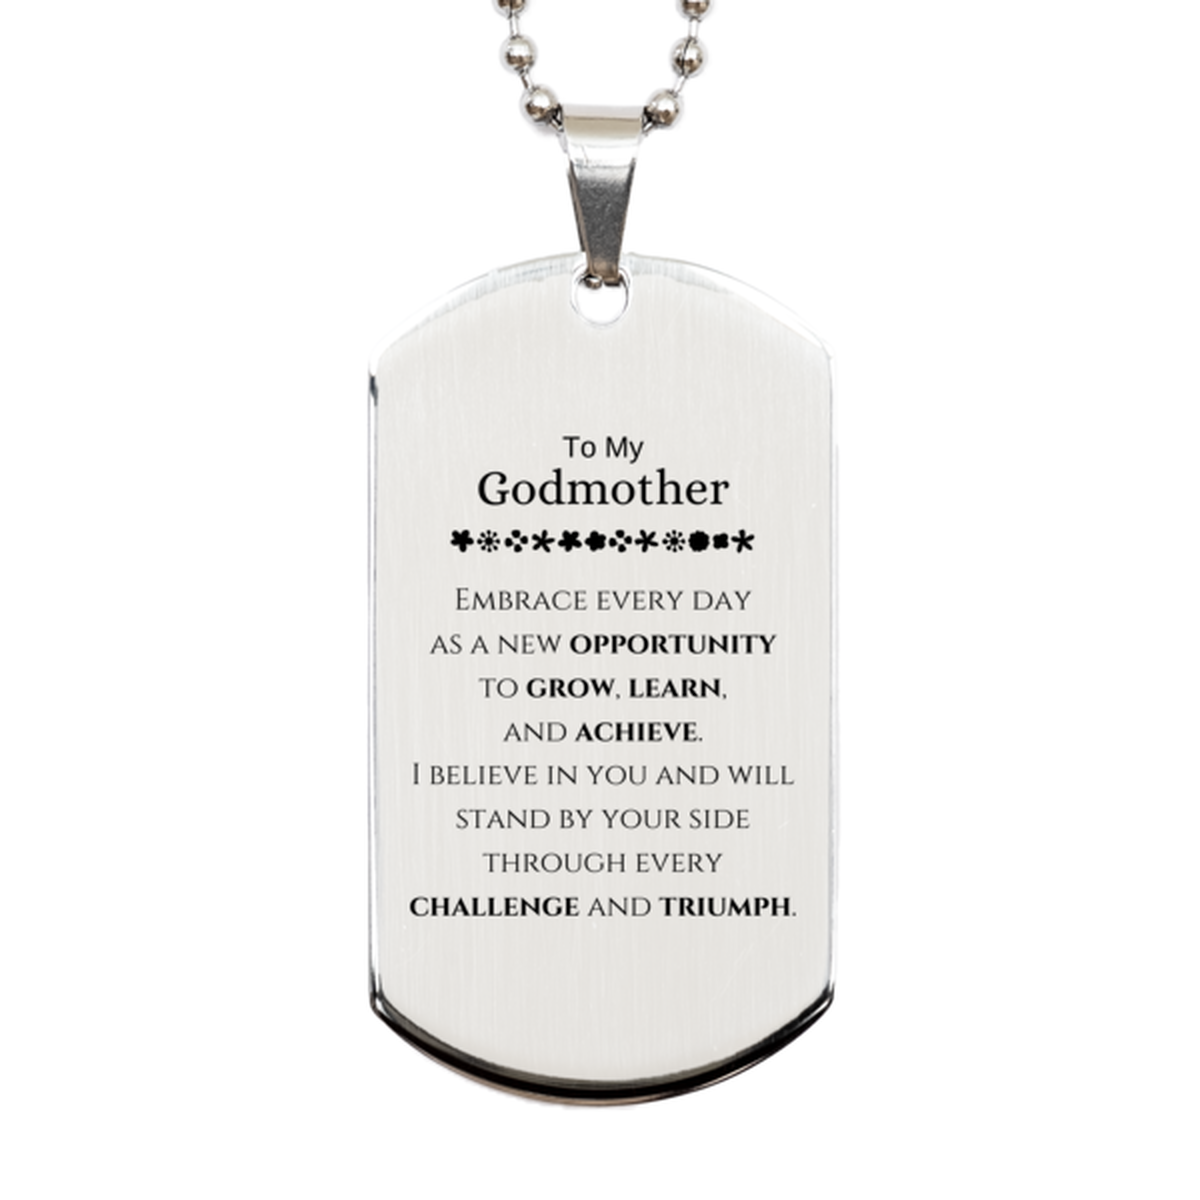 To My Godmother Gifts, I believe in you and will stand by your side, Inspirational Silver Dog Tag For Godmother, Birthday Christmas Motivational Godmother Gifts